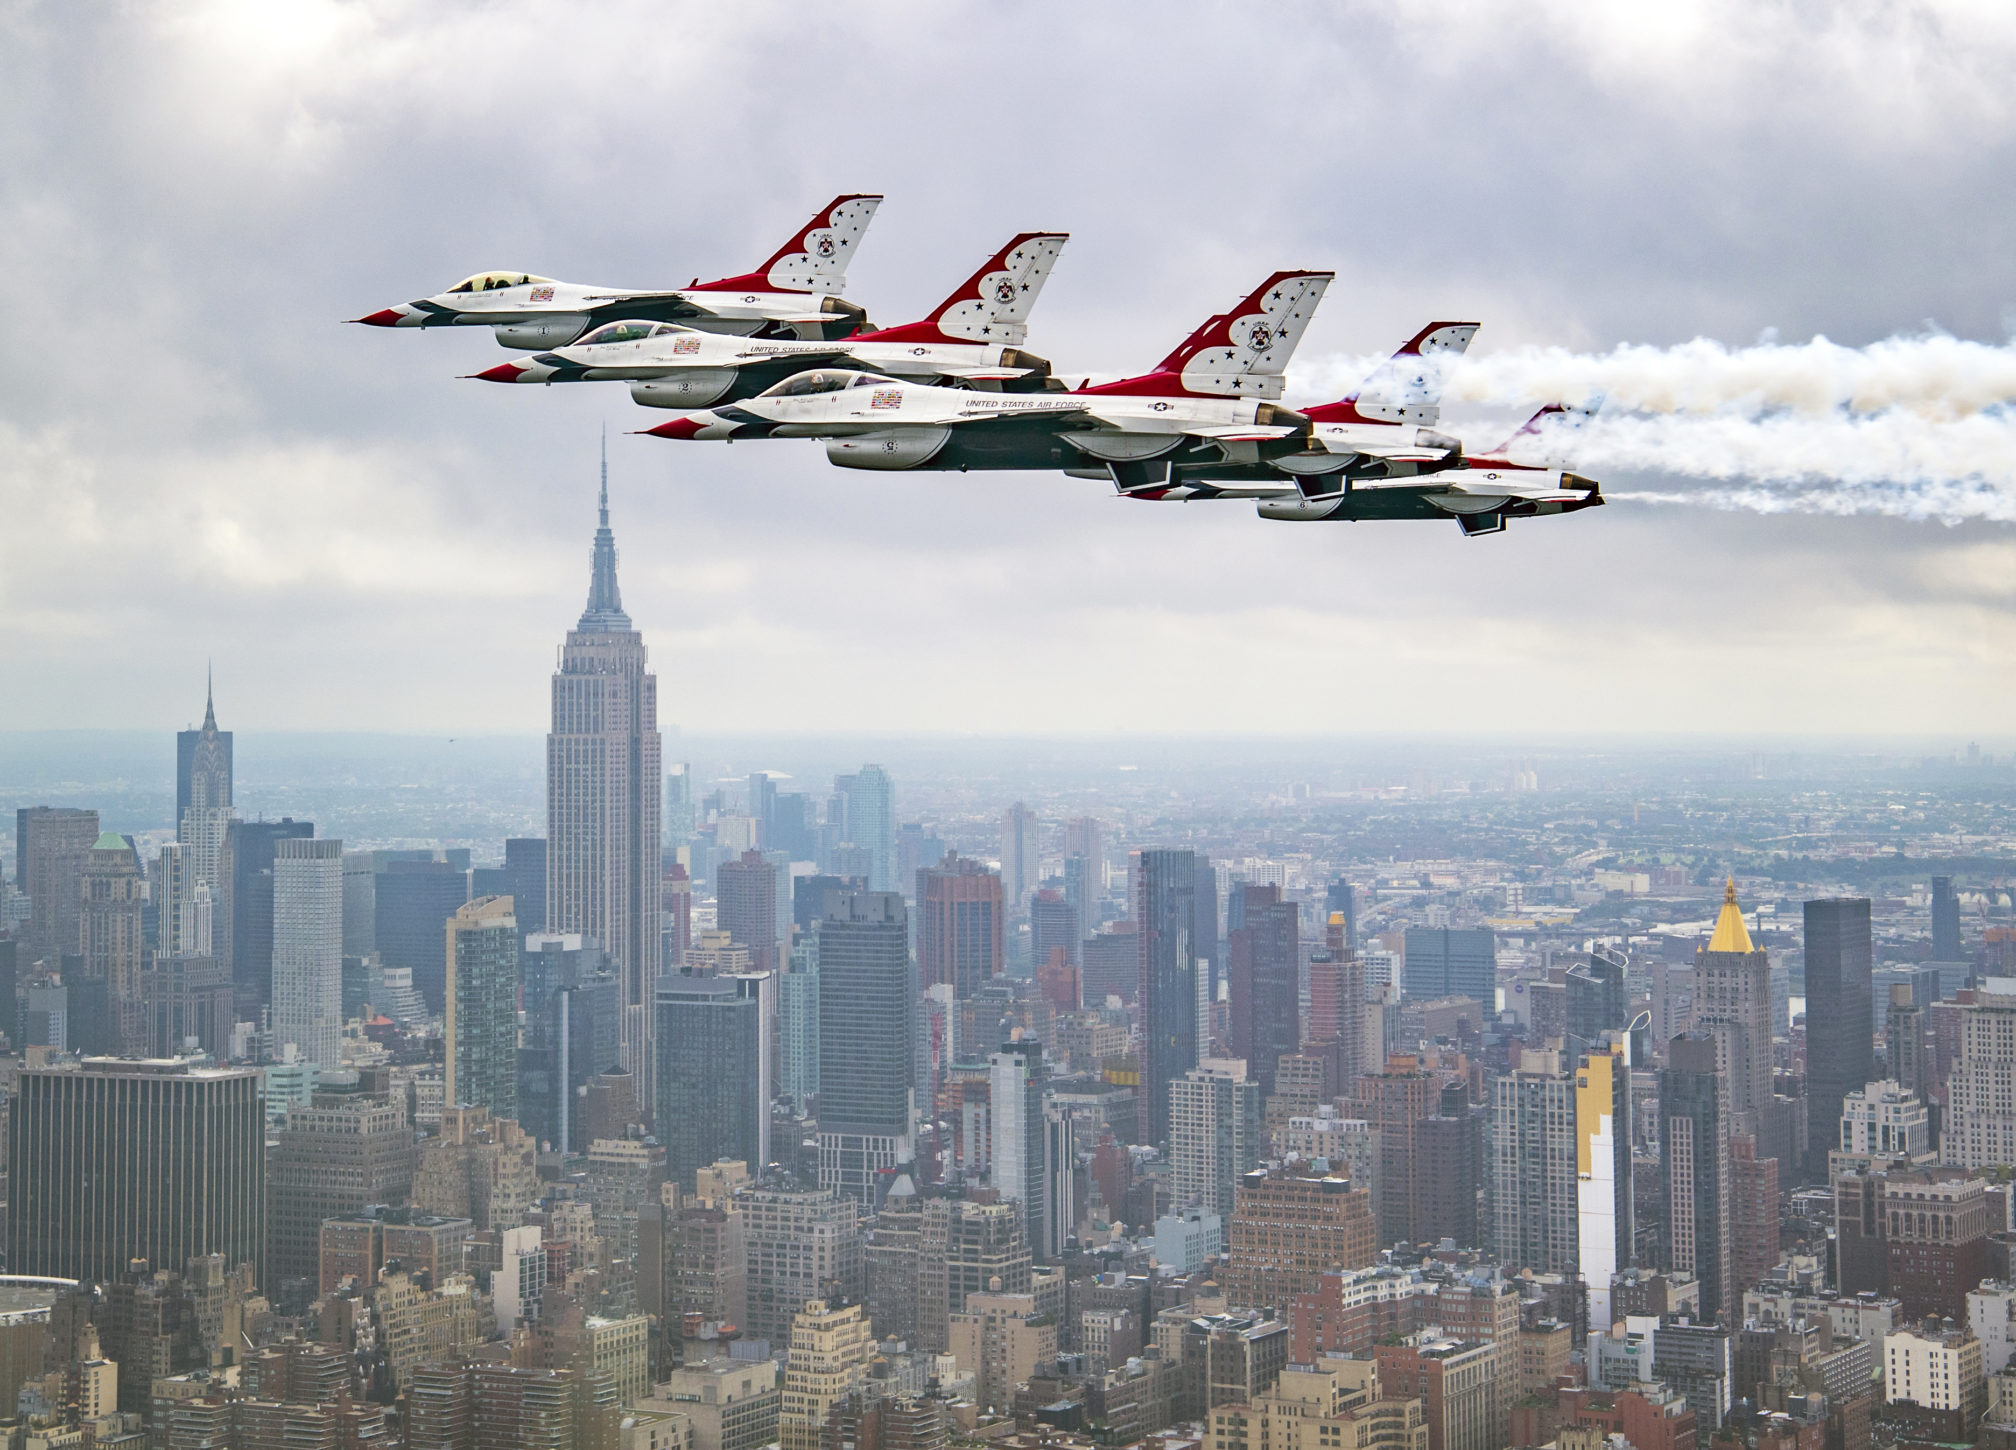 The USAF Thunderbirds will be headlining Thursday’s air spectacular over the Statue of Liberty. Shown: The team flew over NYC in 2016. U.S. Air Force photo by Staff Sgt. Ned T. Johnston